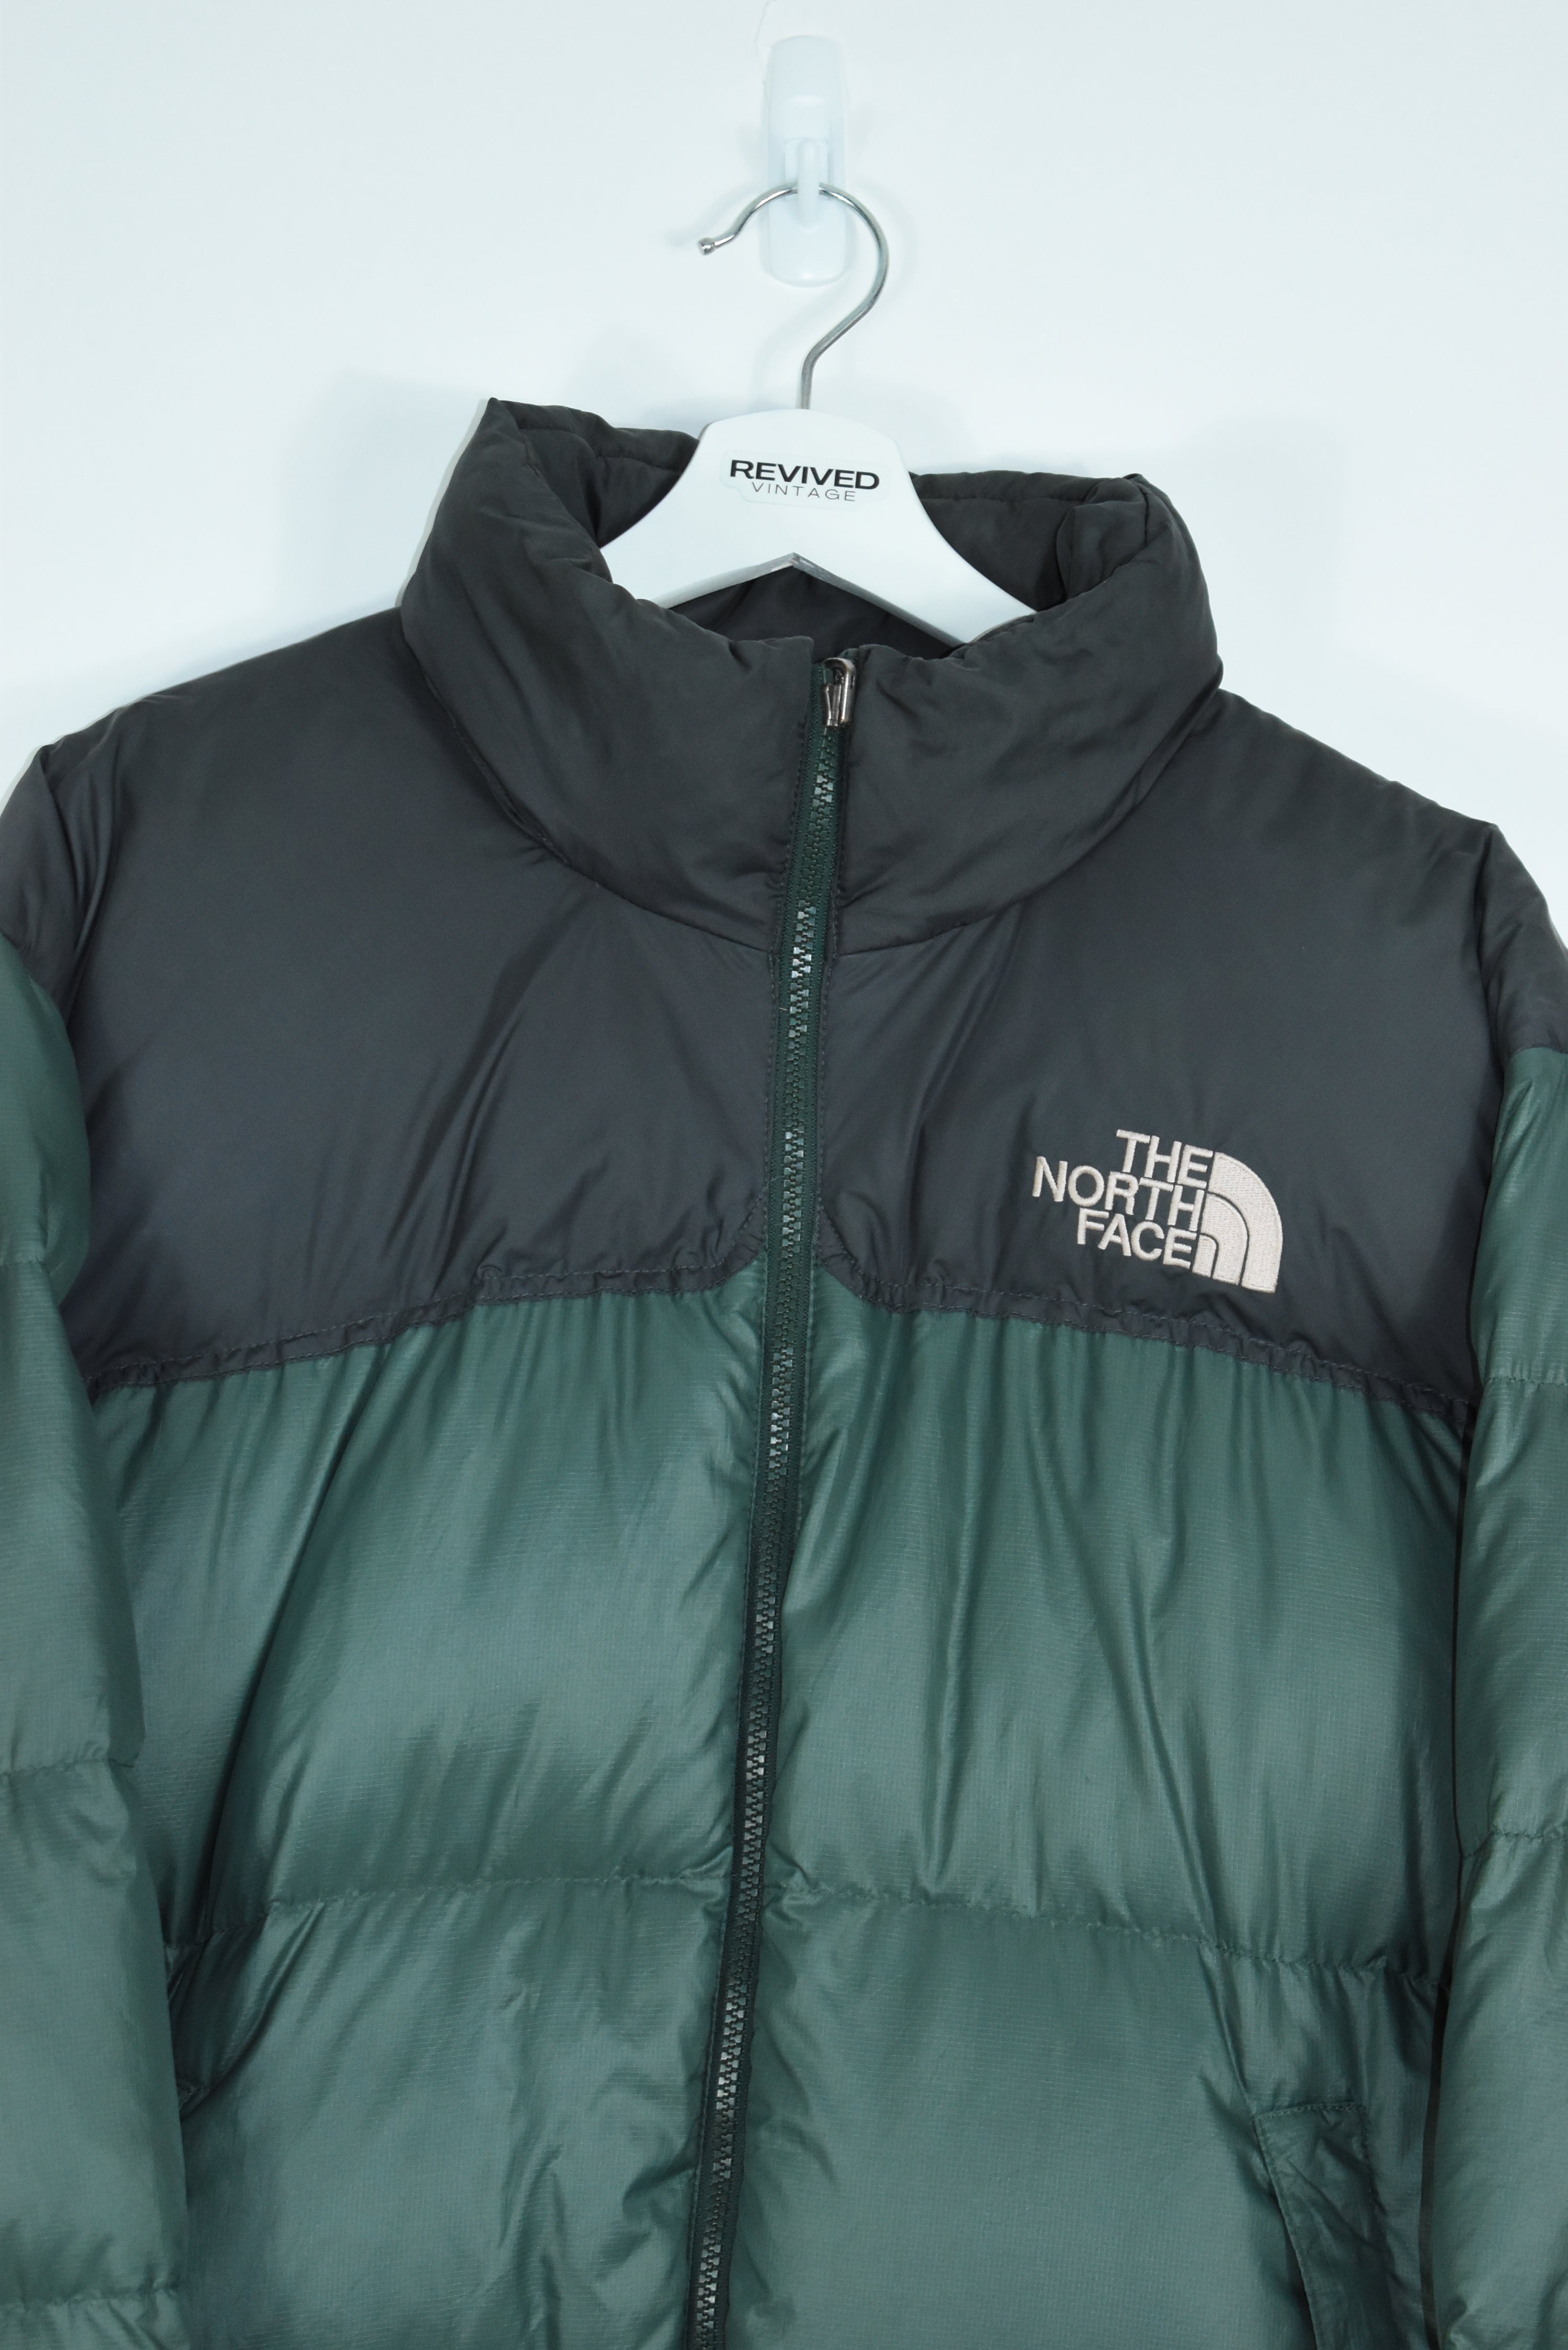 Vintage RARE North Face Forrest Green Puffer L/ XLARGE